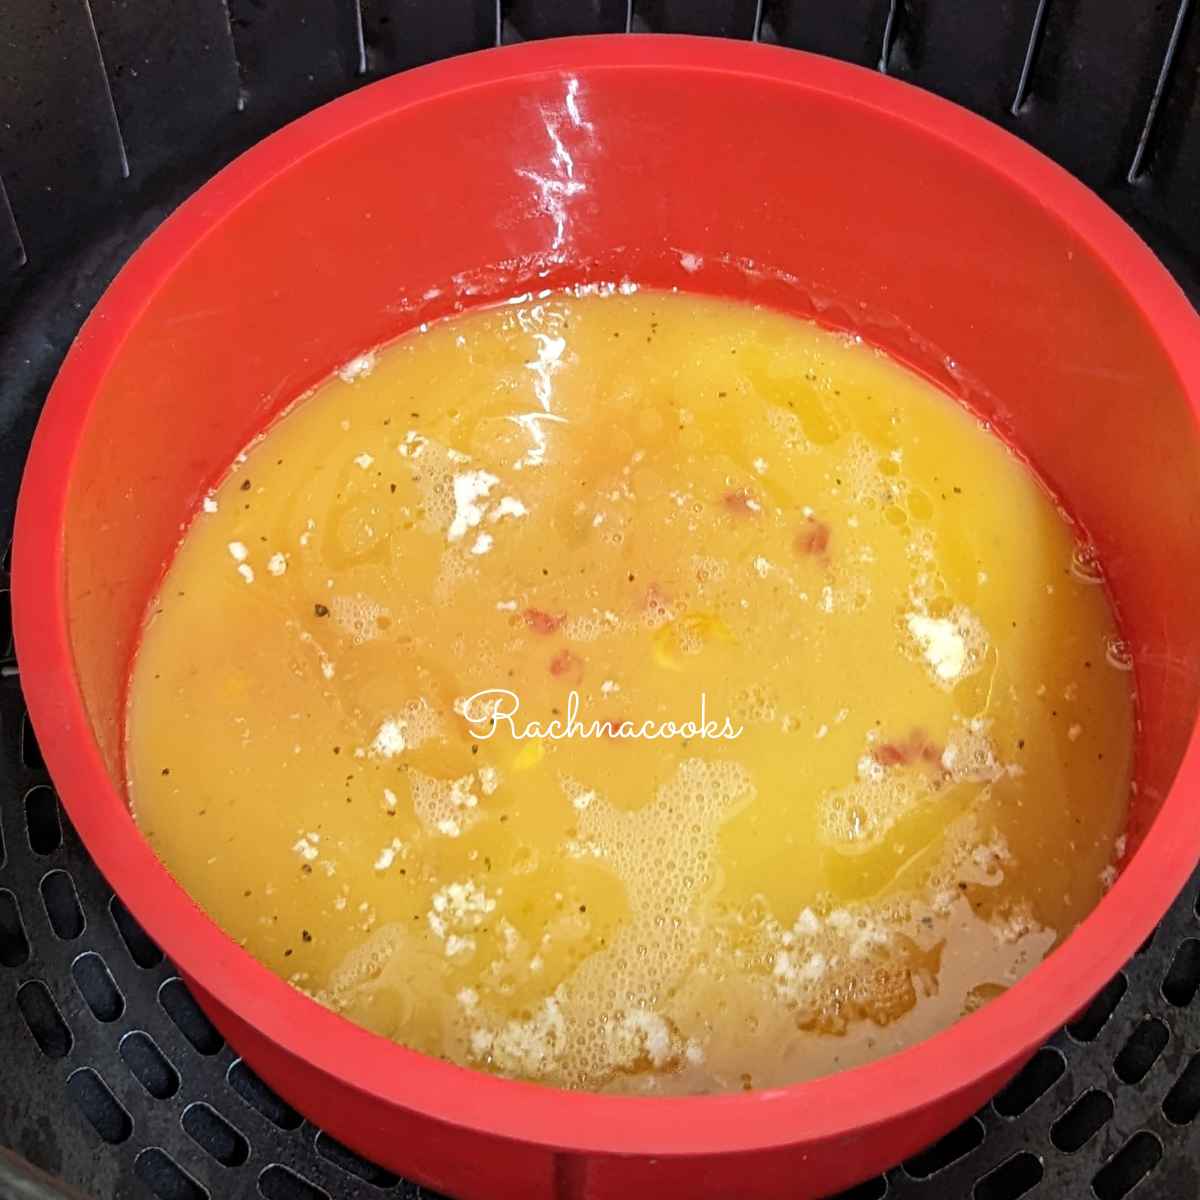 Whisked egg mixture slightly cooked in a mould in air fryer basket.